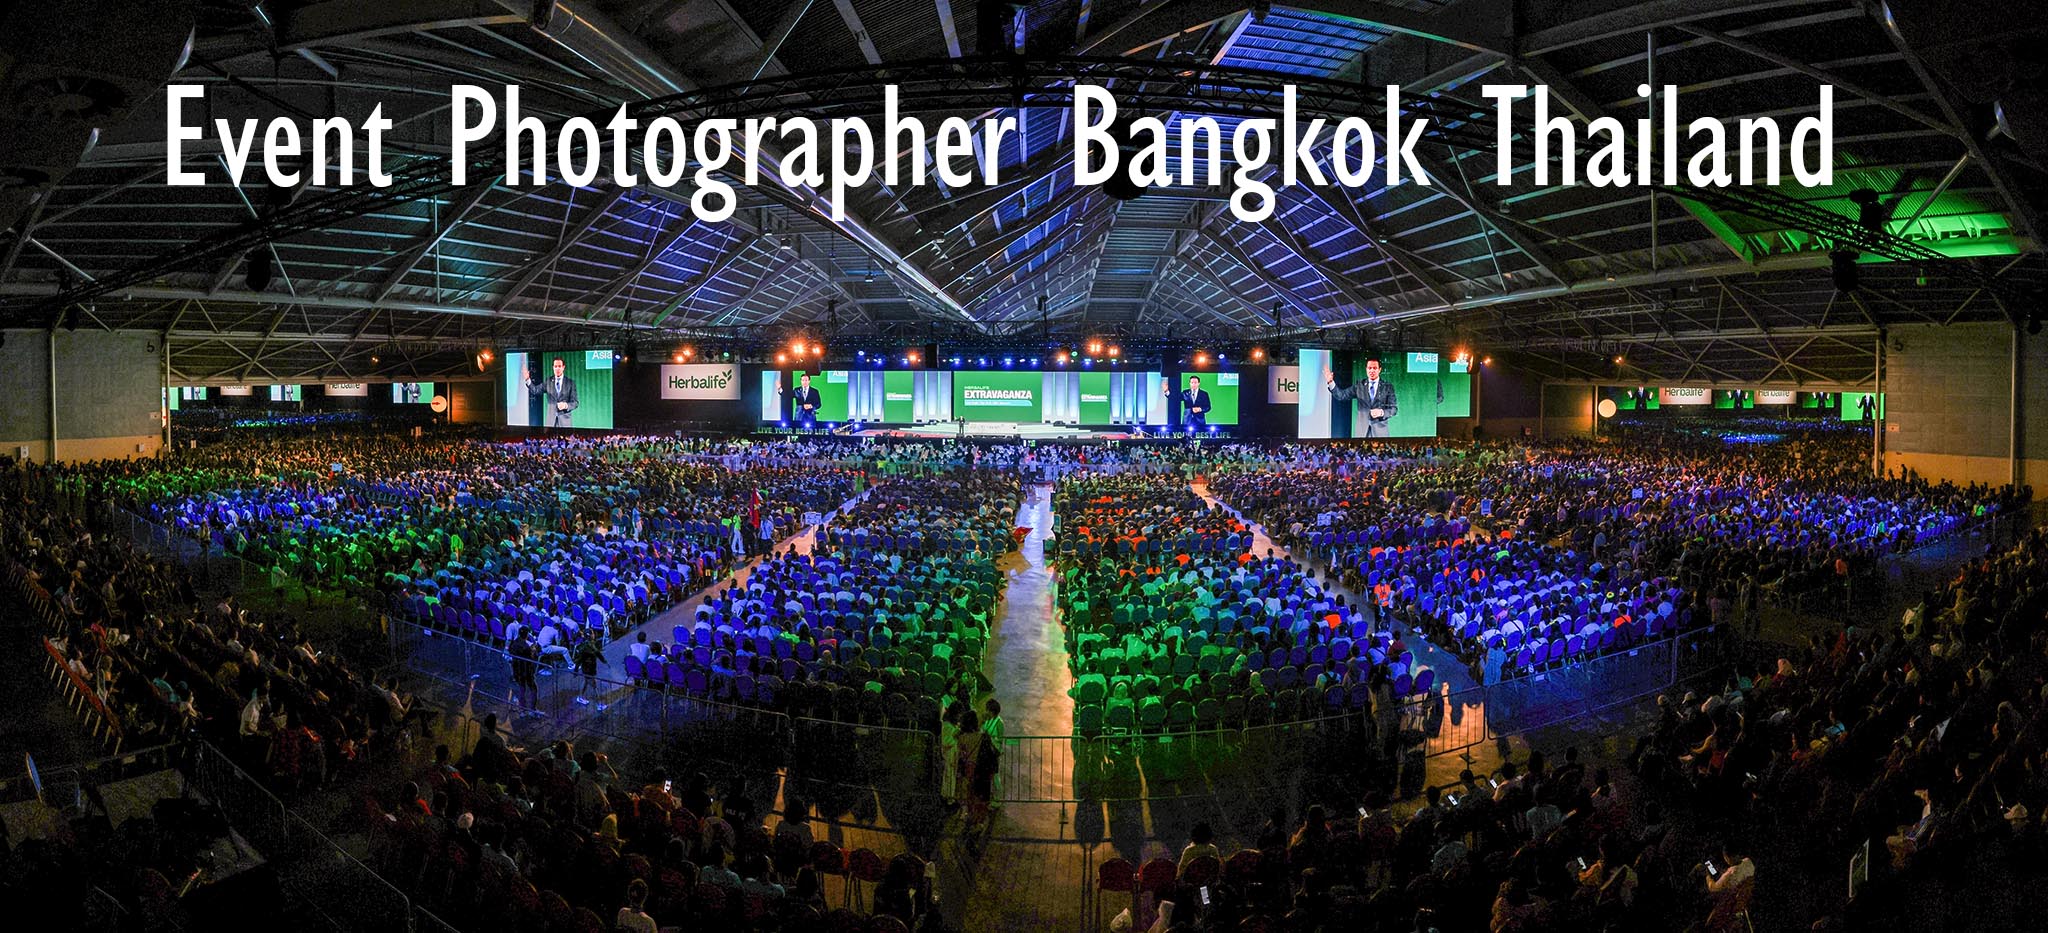 Bangkok event photographer in Thailand convention hall company event stage green and blue lights and stage with attendees